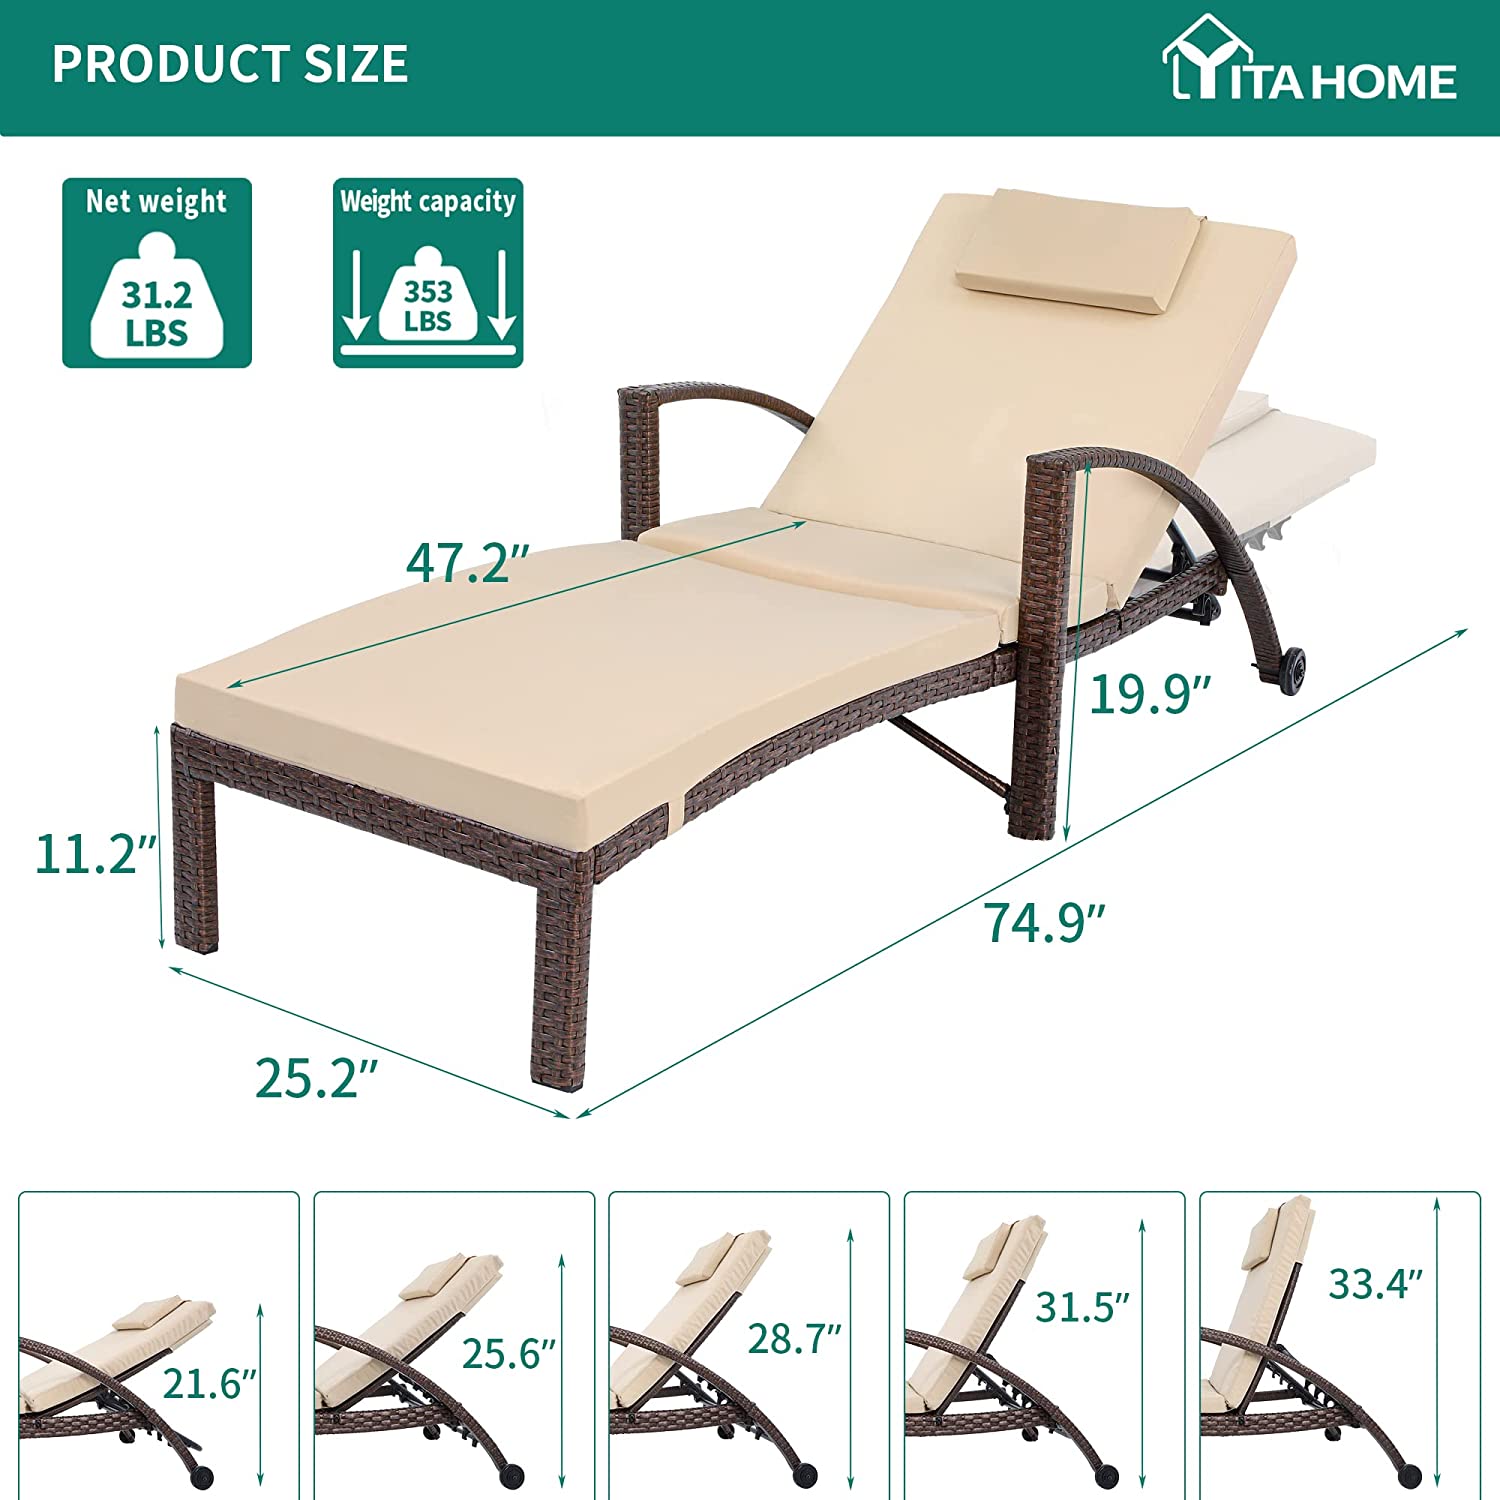 YITAHOME Outdoor Chaise Lounge Chairs, PE Rattan Wicker Patio Pool Loungers with Adjustable Backrest, Arm, Cushion, Pillow and Wheels for Poolside Backyard Porch Garden Beach (2, Brown) - image 2 of 9